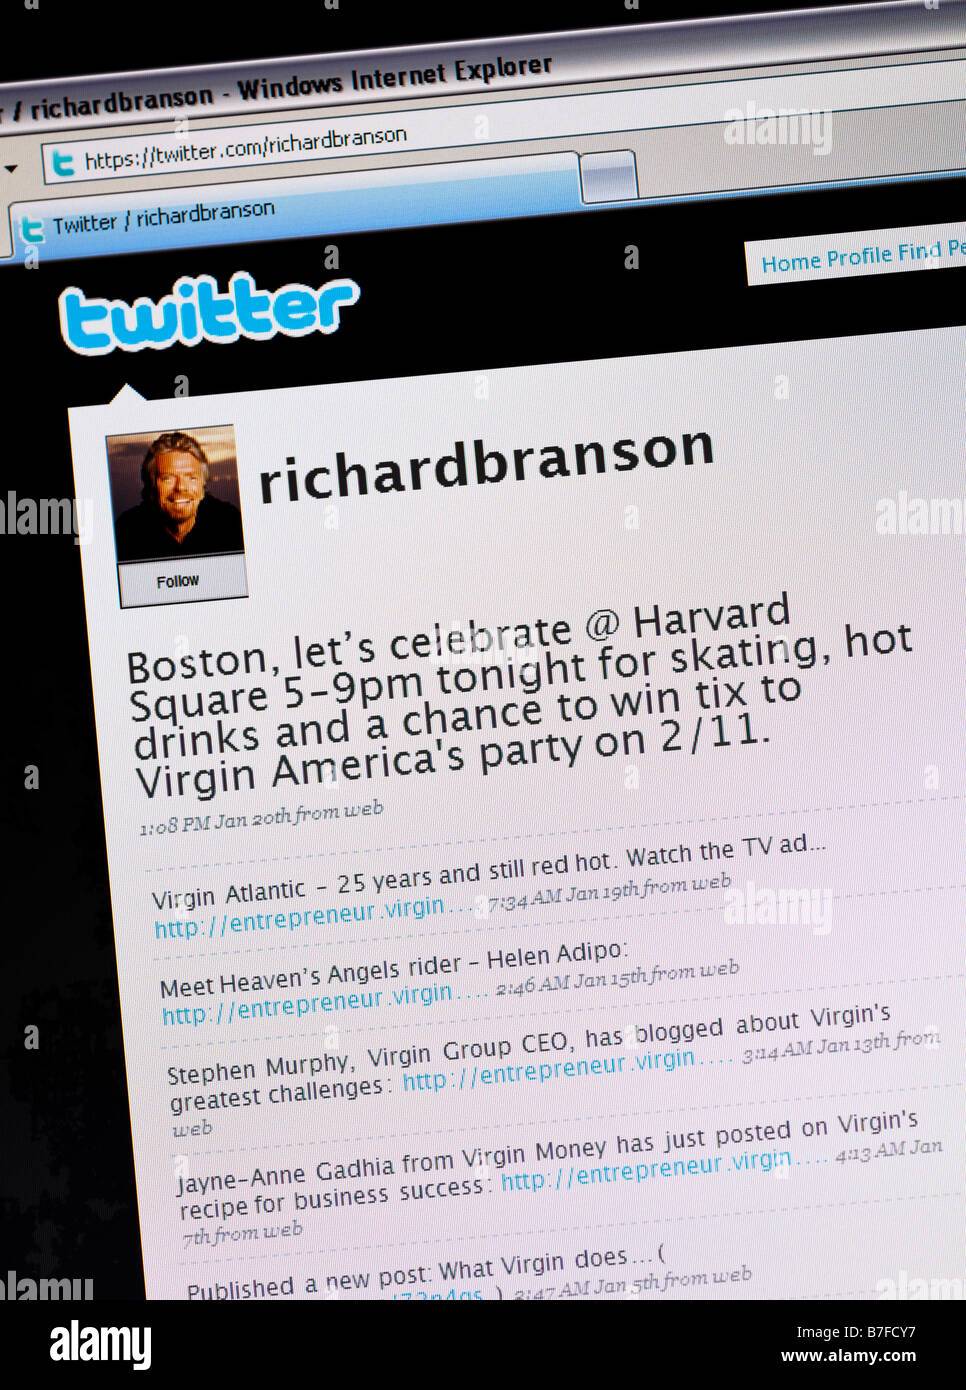 Twitter social networking and micro blogging site - Richard Branson twitter page showing tweets being used for company promotion Stock Photo